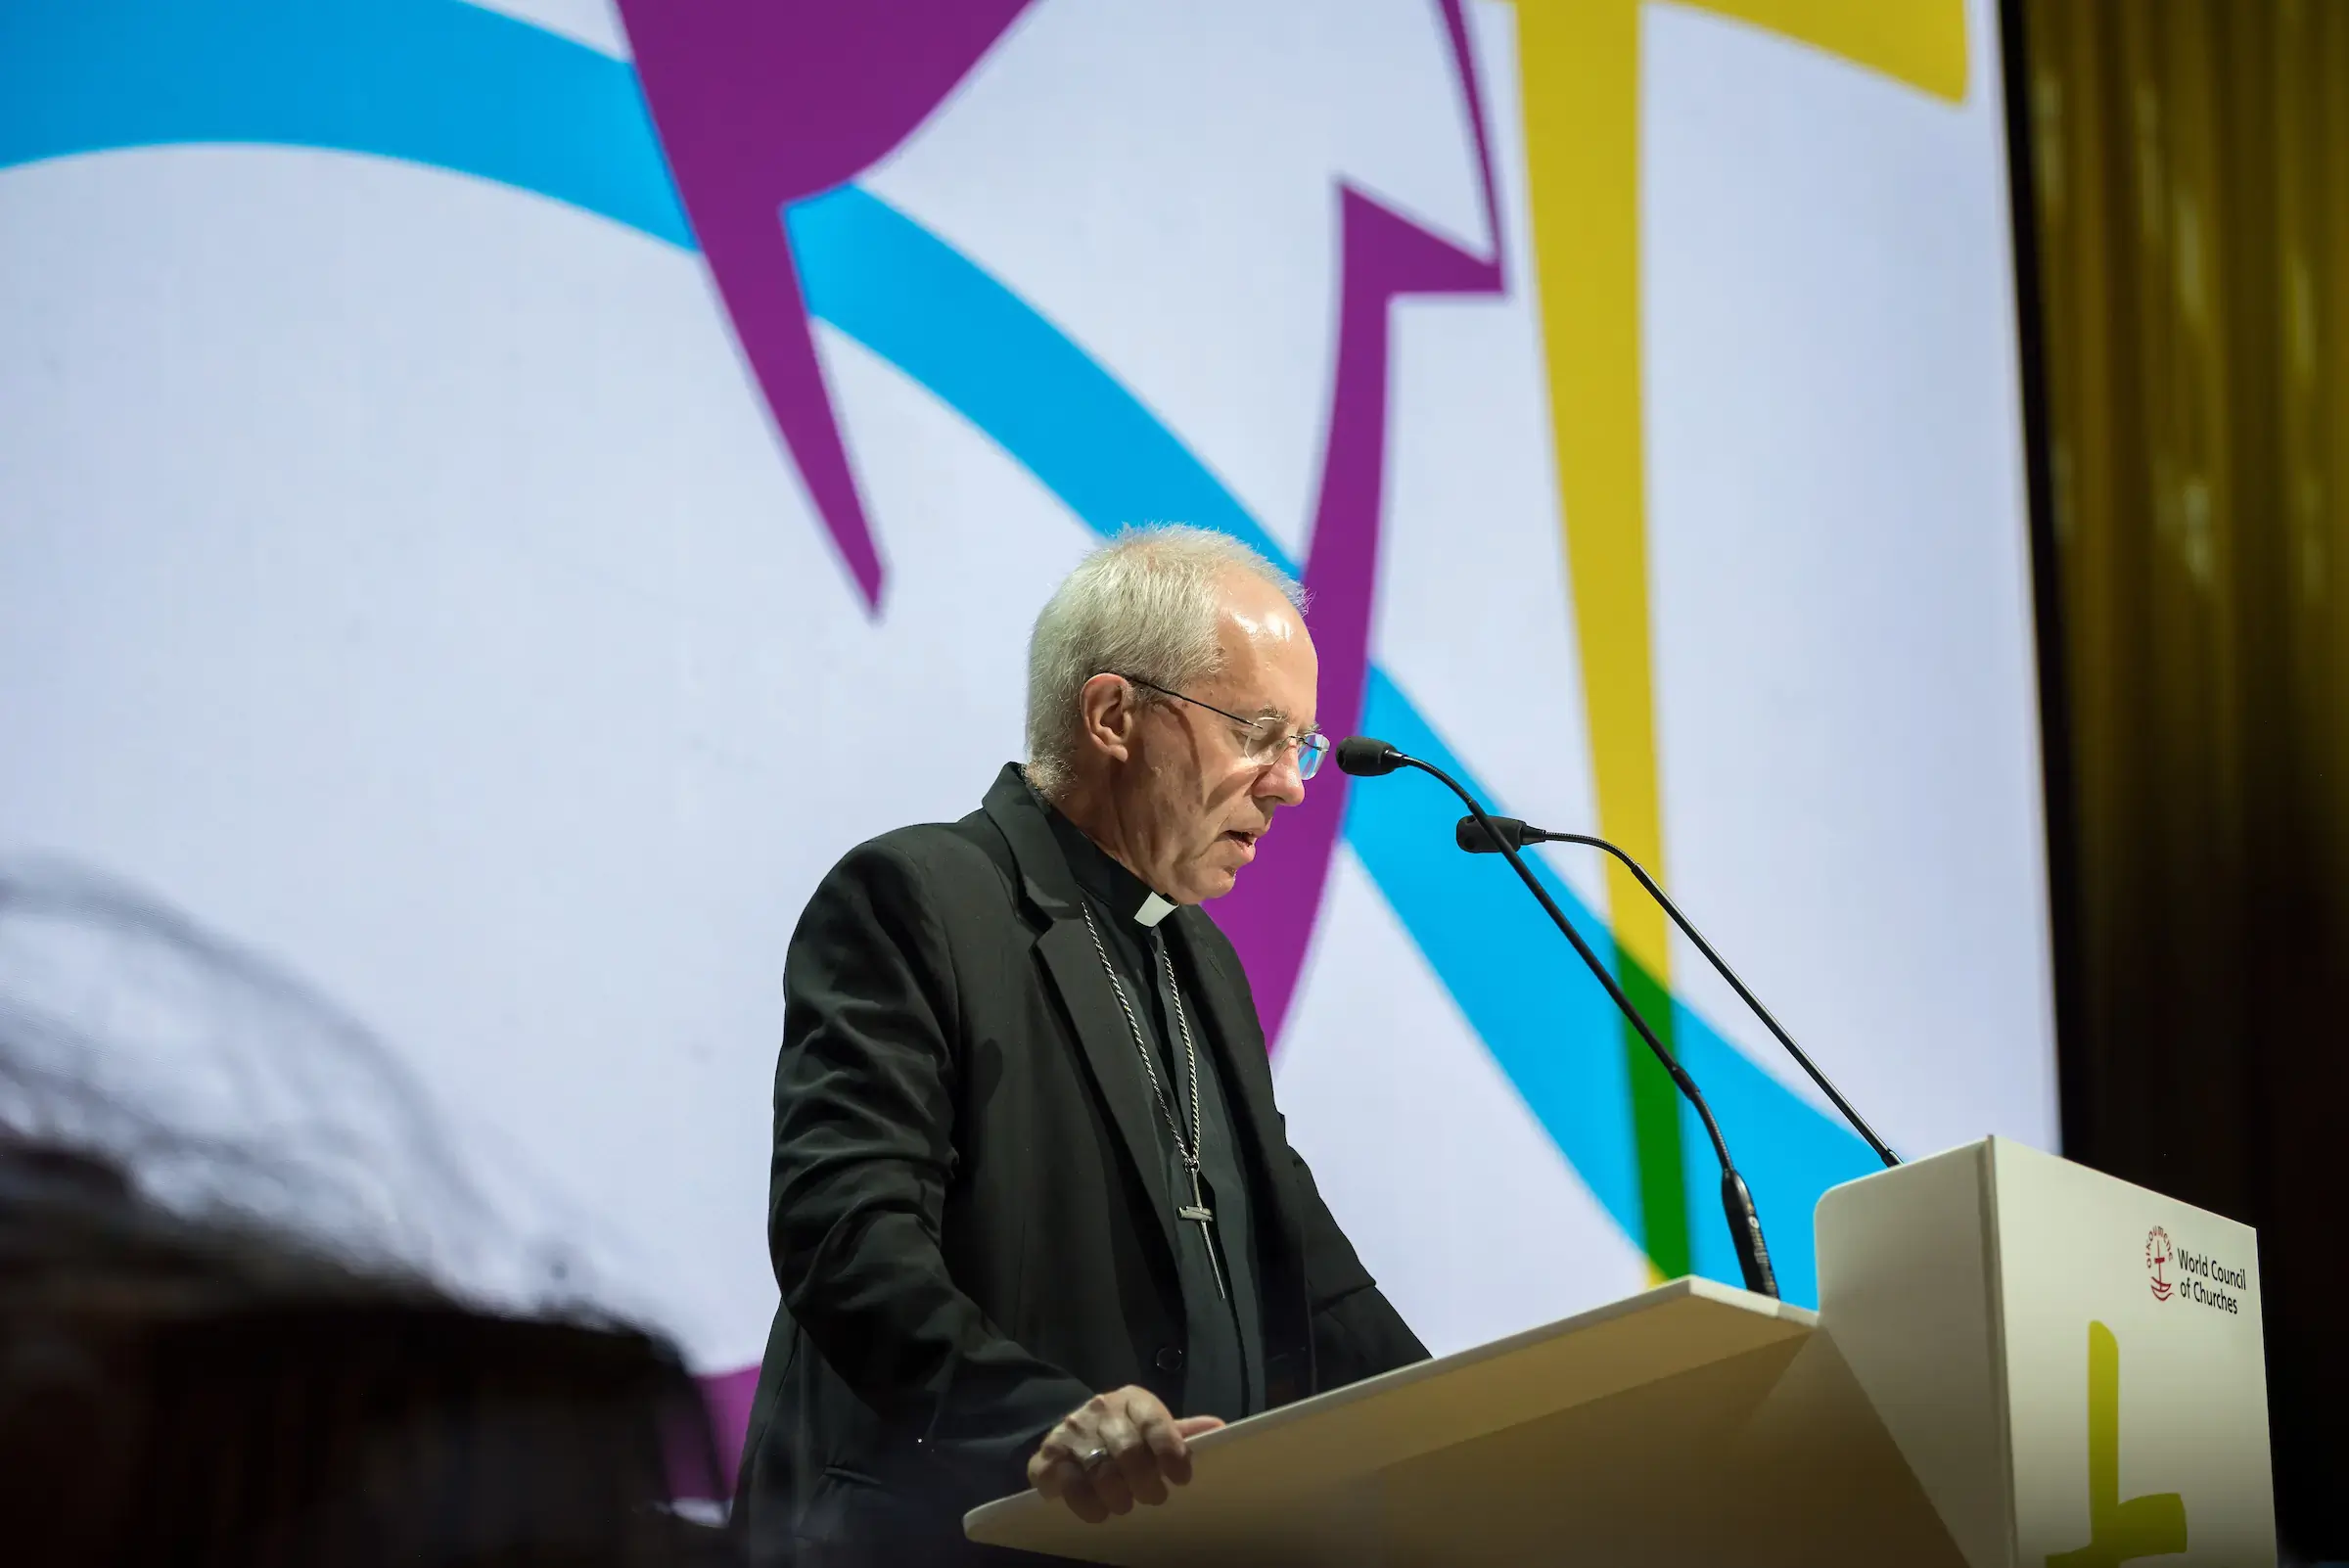 Archbishop of Canterbury Justin Welby addressed the WCC Assembly during the thematic plenary on Christian unity